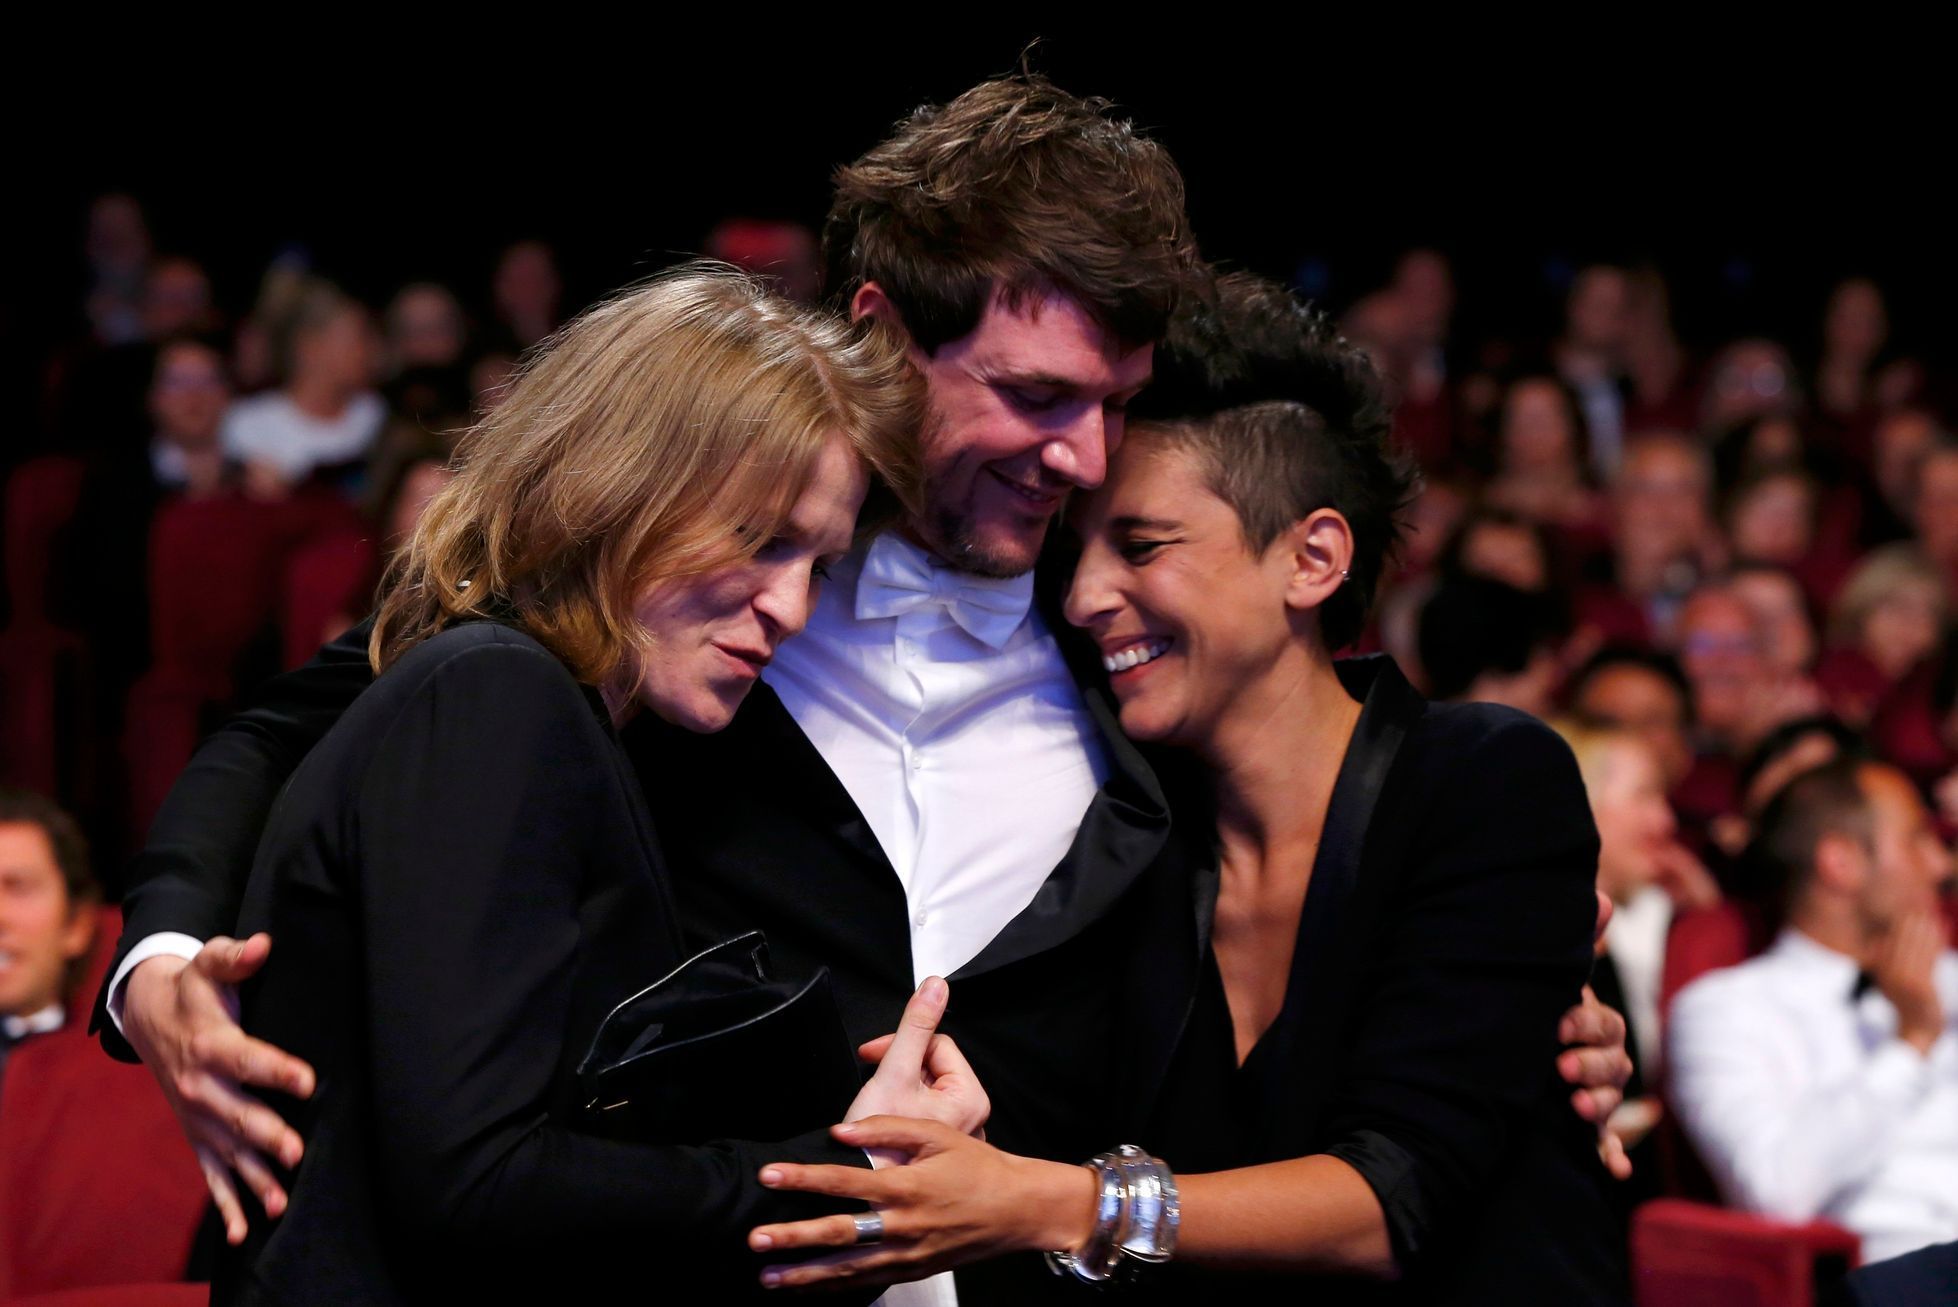 Co-directors Claire Burger, Marie Amachoukeli and Samuel Theis, Camera d'Or award winners for their film &quot;Party Girl&quot;, react after being awarded during the closing ceremony of the 67th Canne